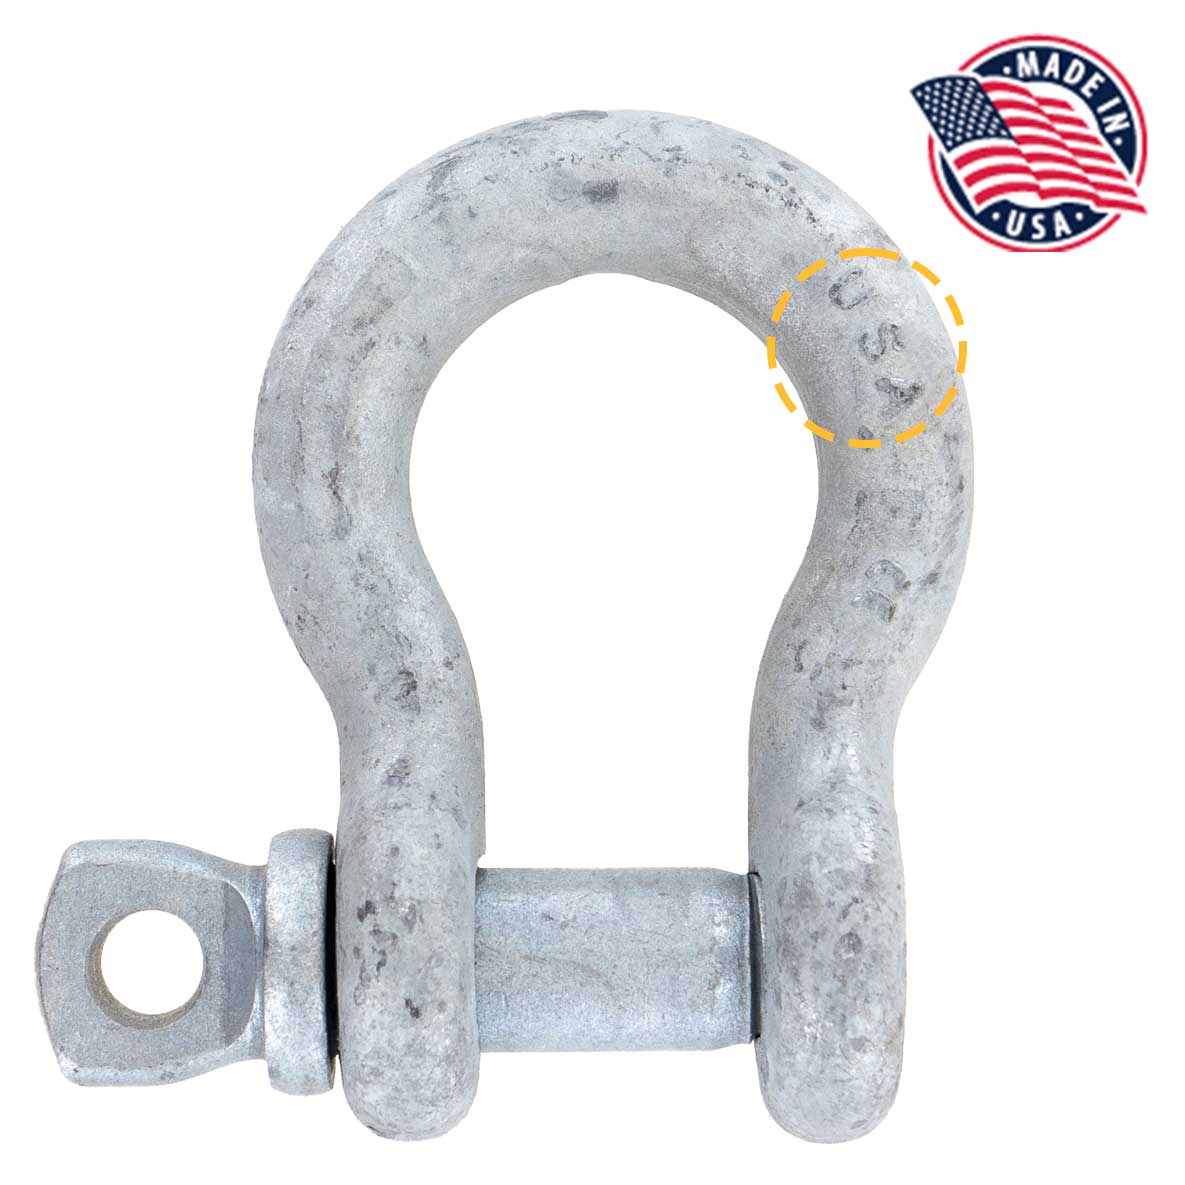 7/8" Crosby® Alloy Screw Pin Anchor Shackle | G-209A - 9.5 Ton made in USA